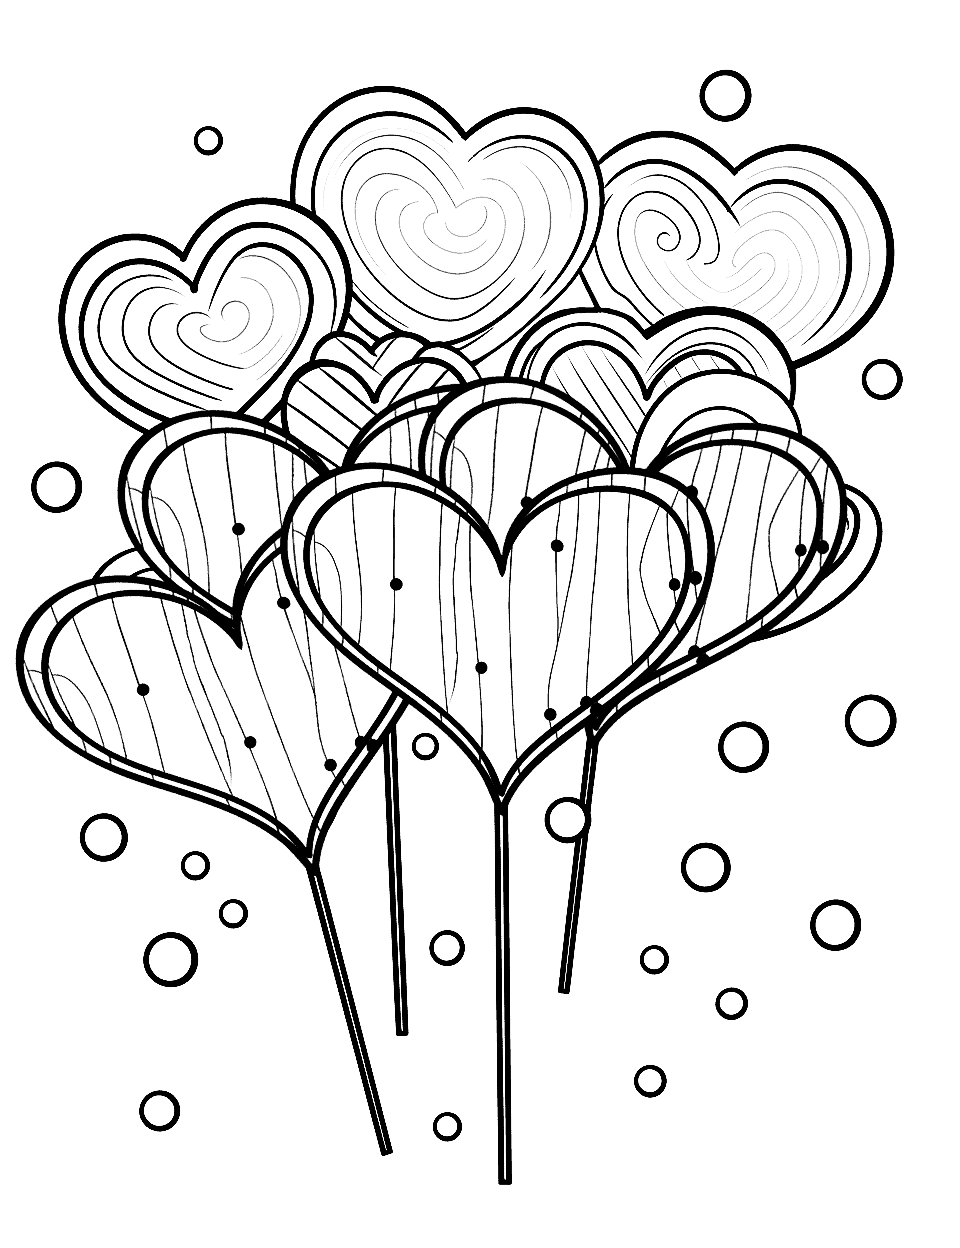 Valentine's Day Hearts and Candy Coloring Page - A scene with heart-shaped candies for Valentine’s Day decorations.